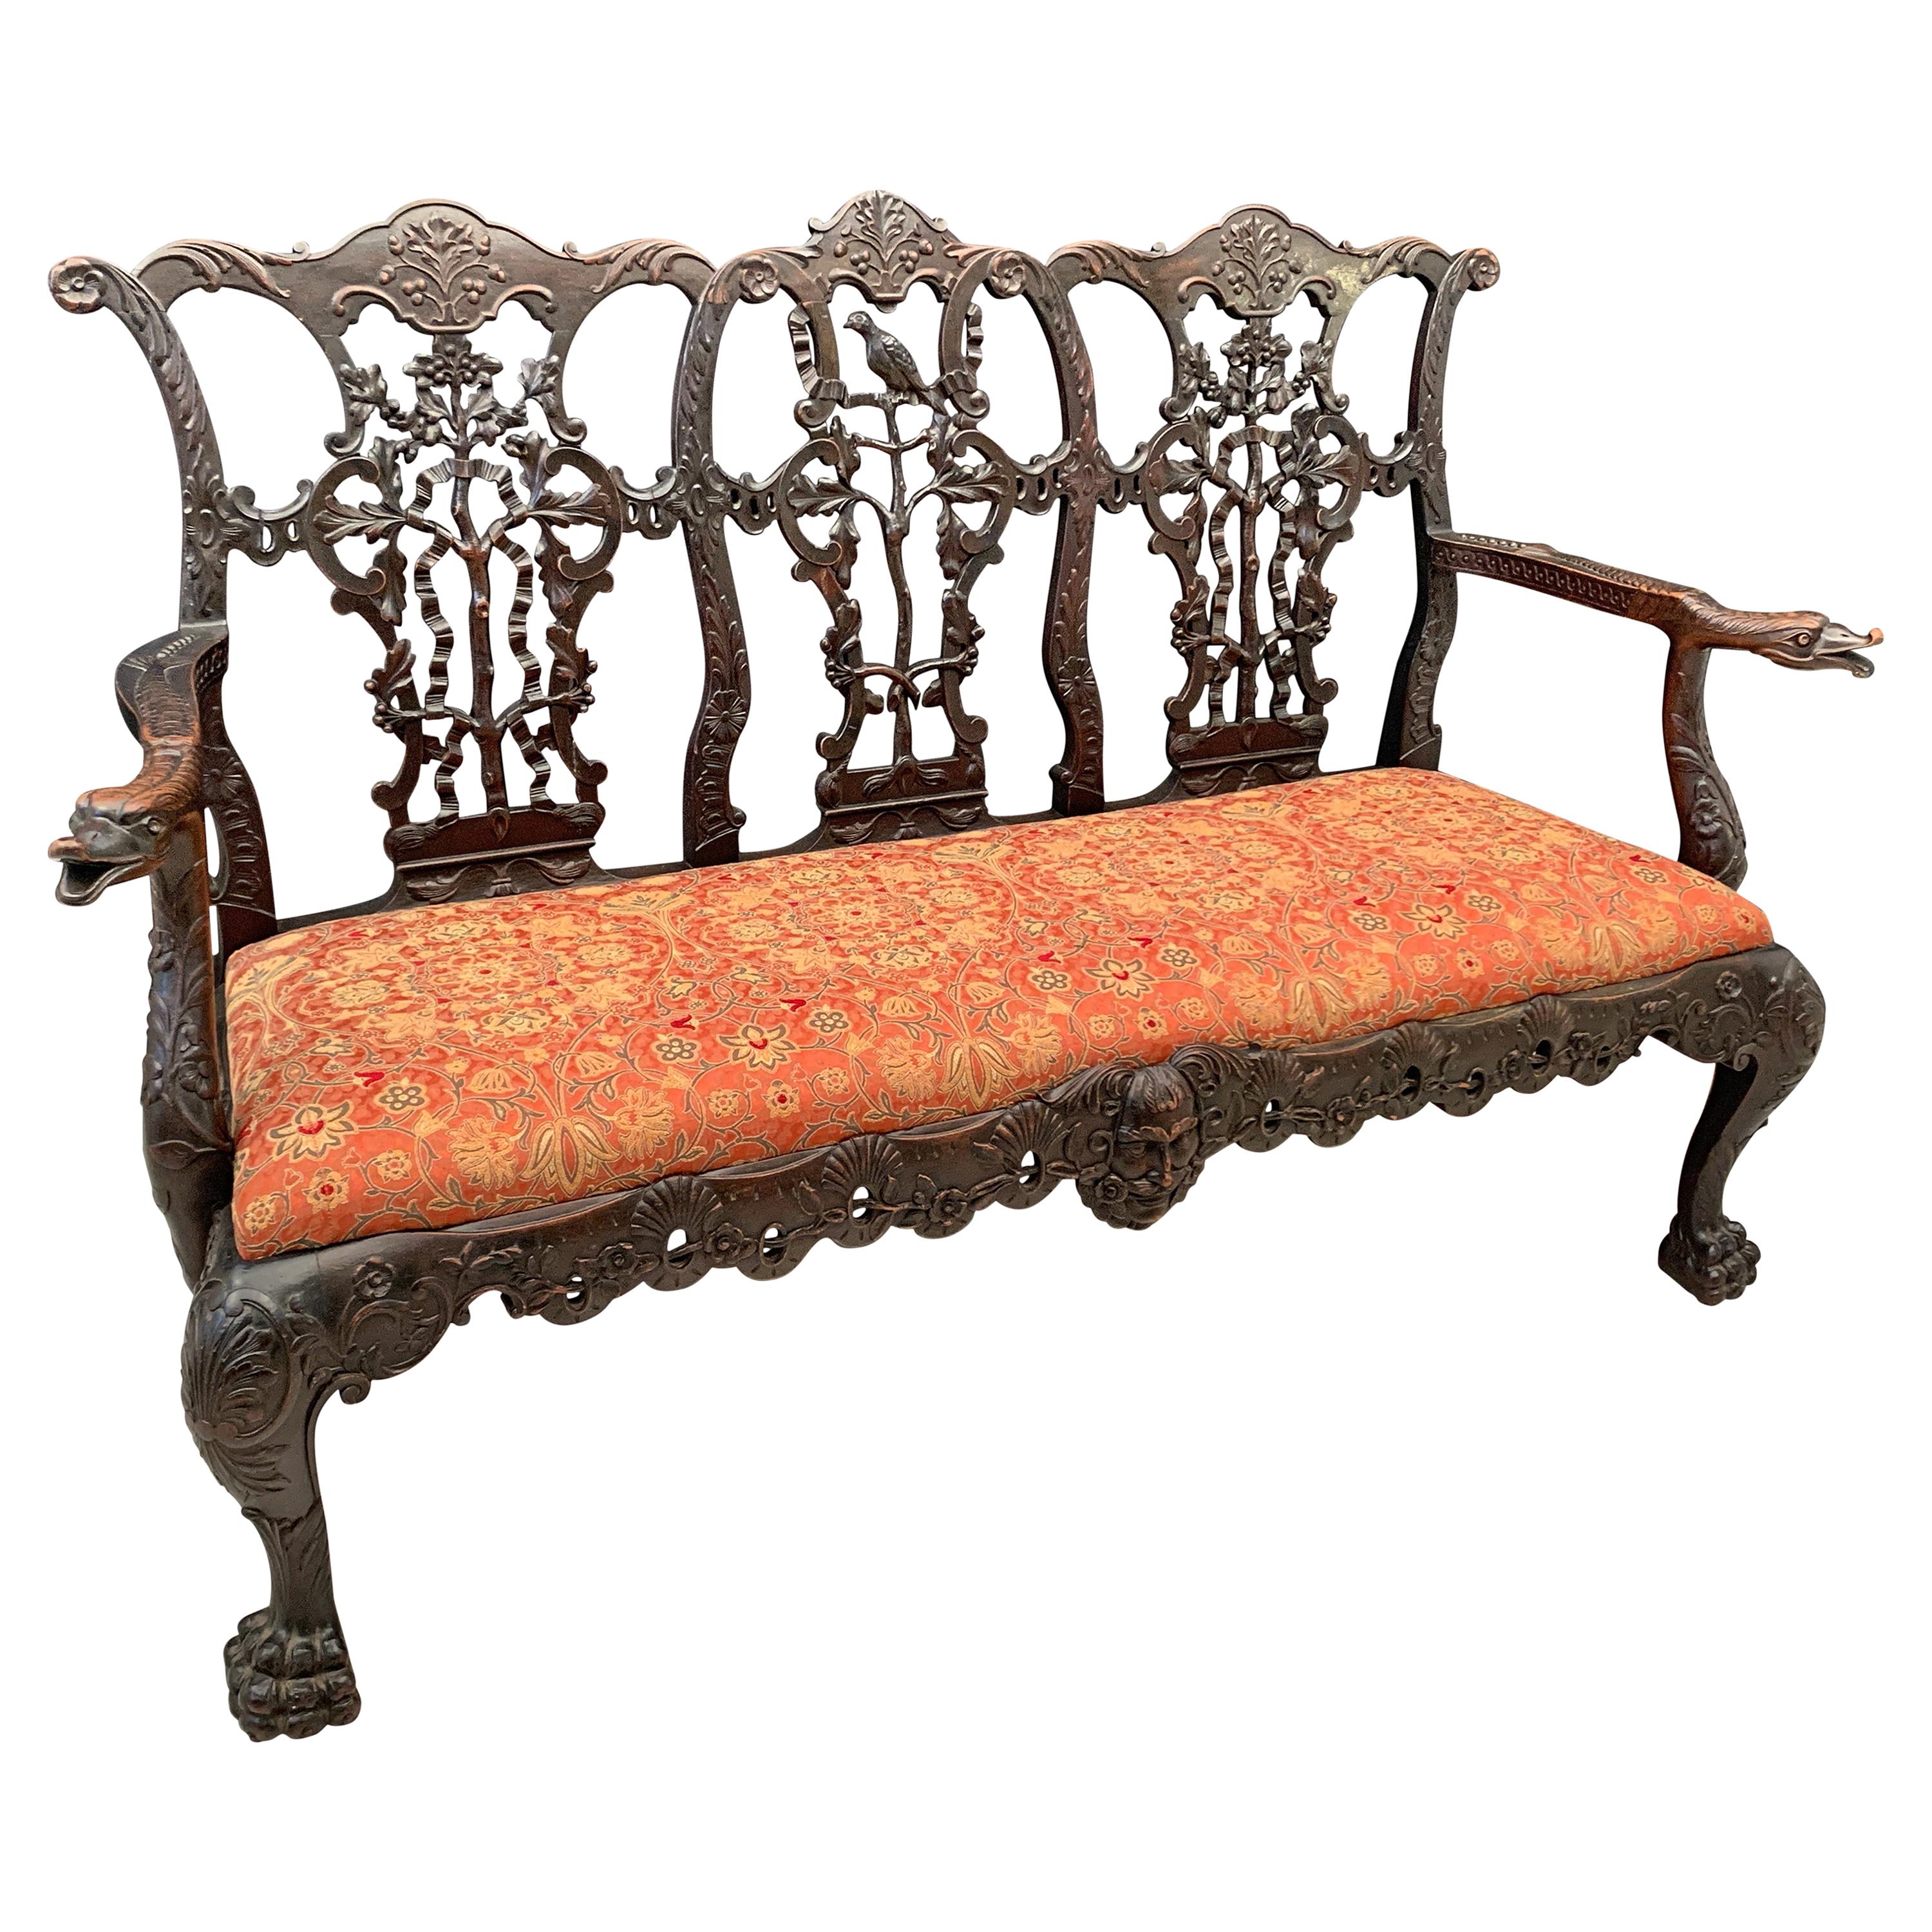 Chippendale Style Carved Mahogany Triple Back Settee, 19th Century, England